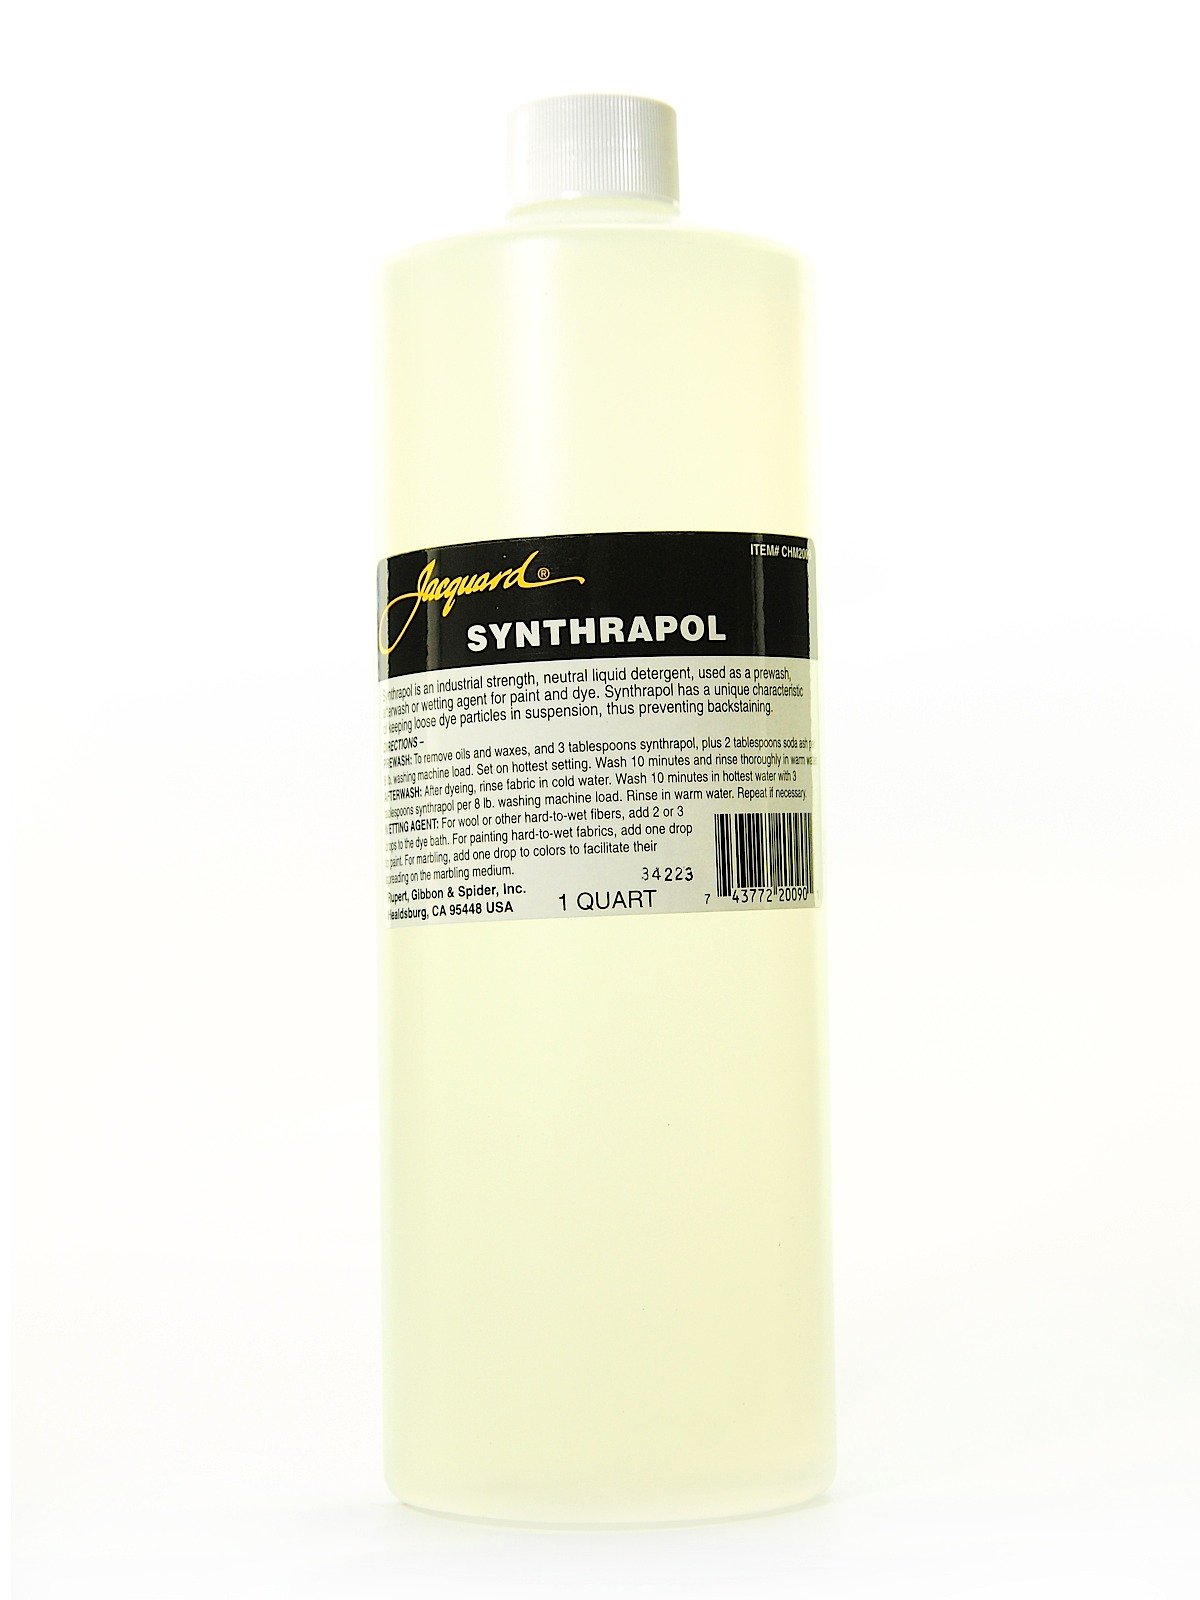 eQuilter SYNTHRAPOL - Textile Specialty Soap - 4 oz